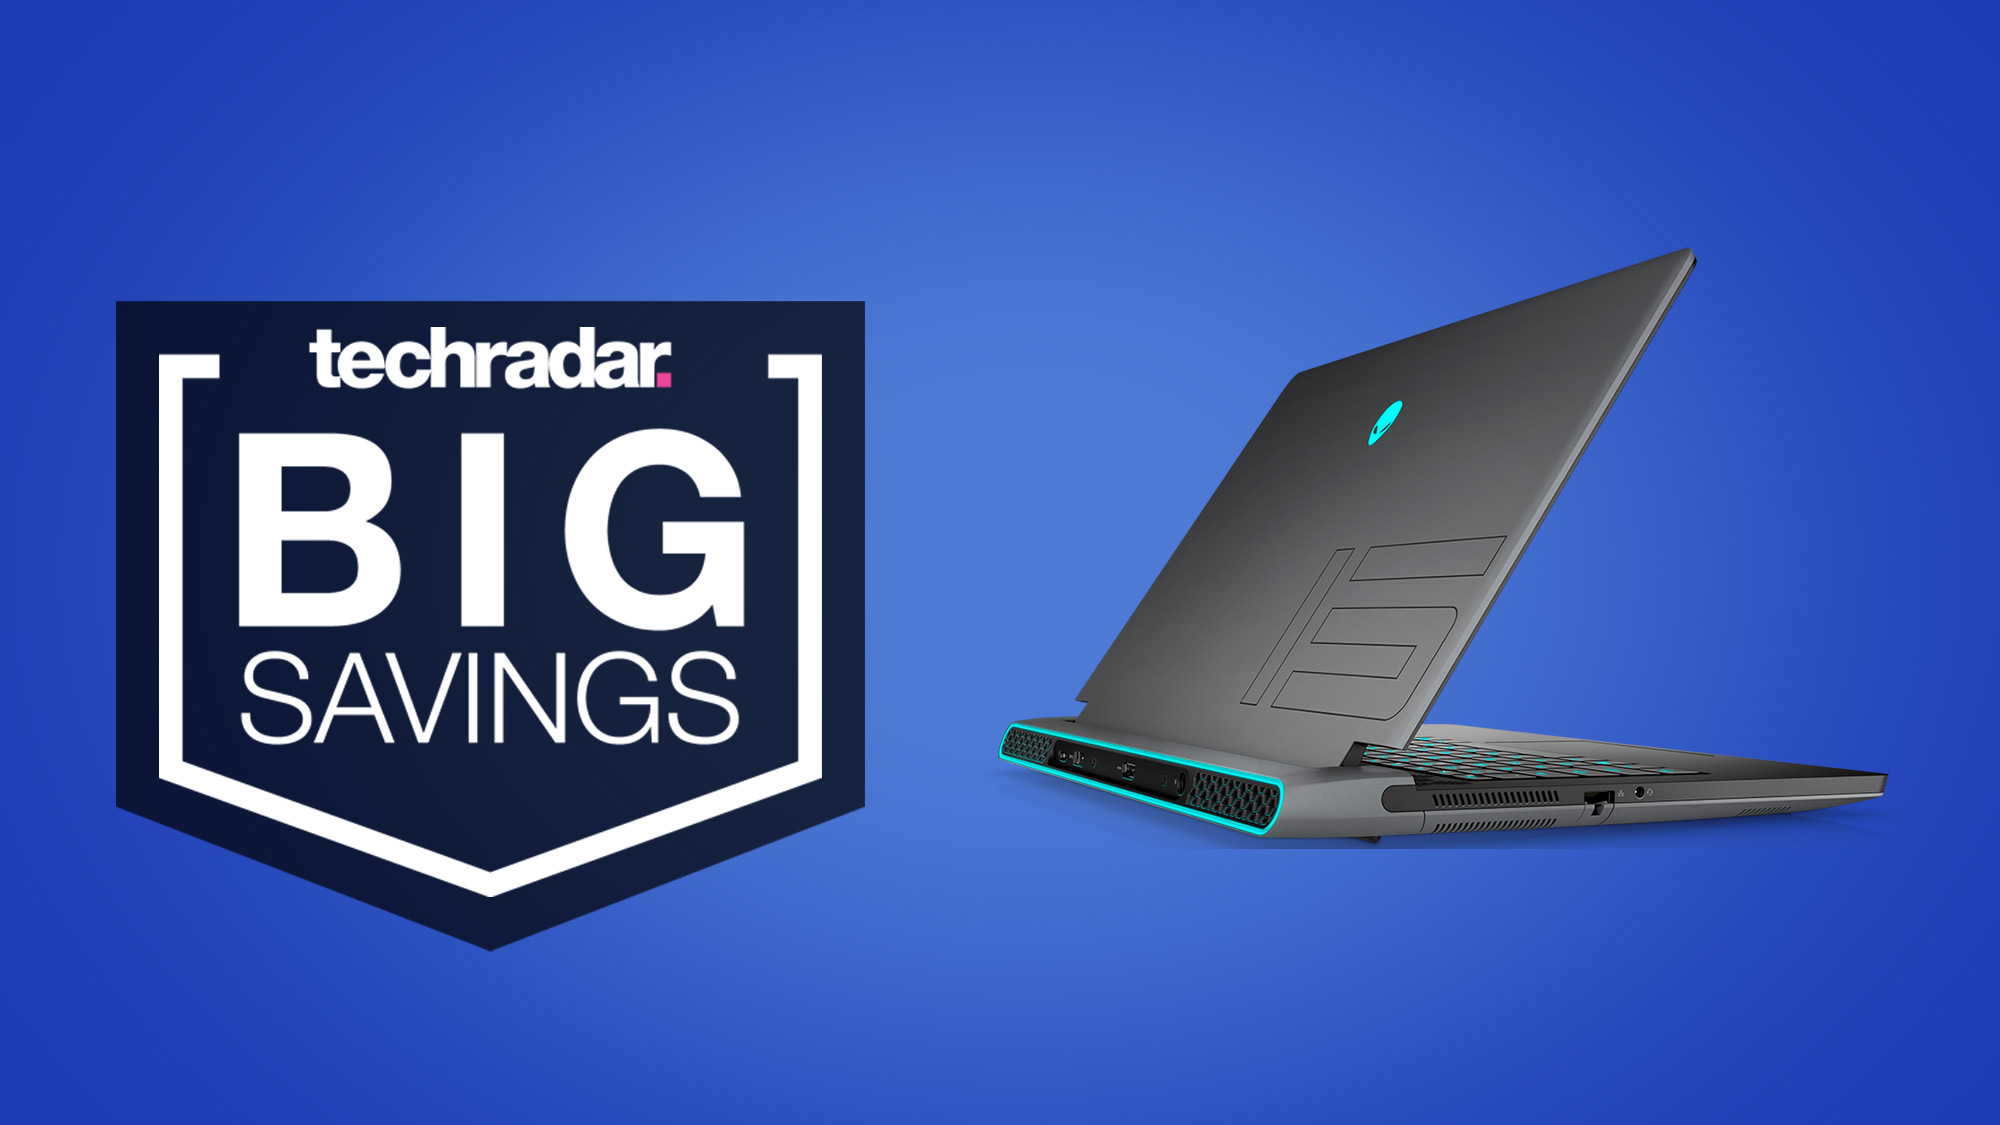 Dell’s Boxing Day sale slashes up to 25% off Alienware gaming laptops + more